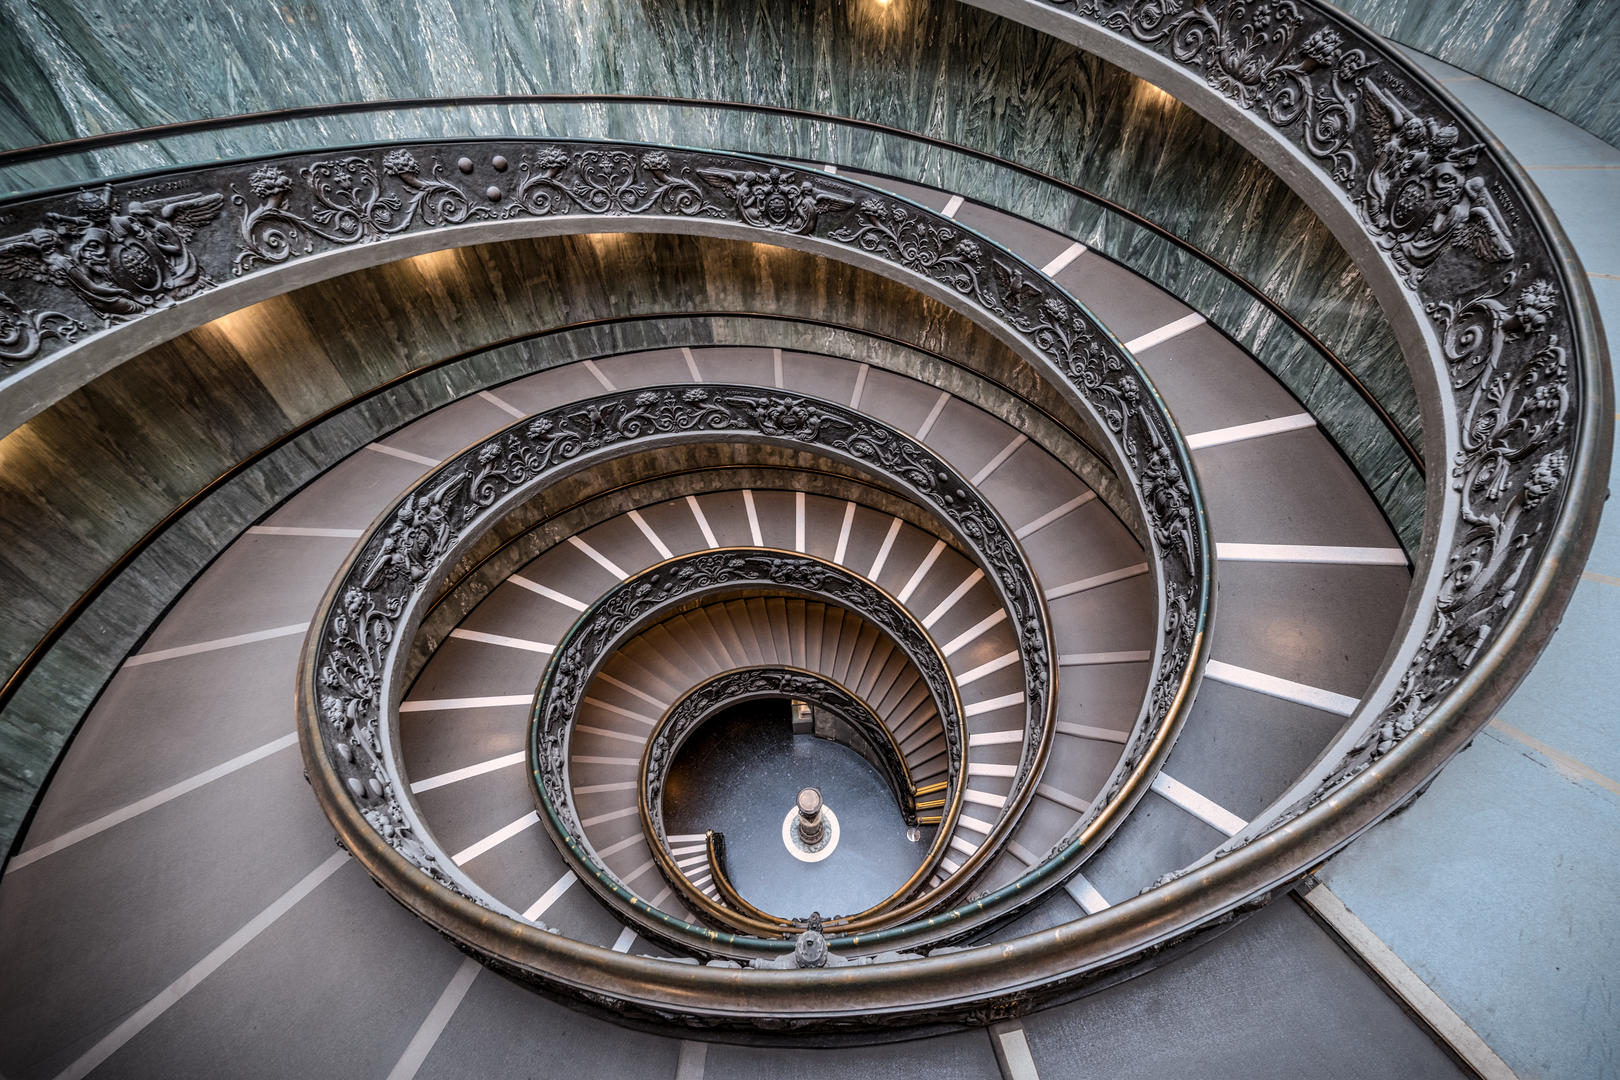 Bramante Staircase by Mathew Browne Photocrowd photo competitions & com...